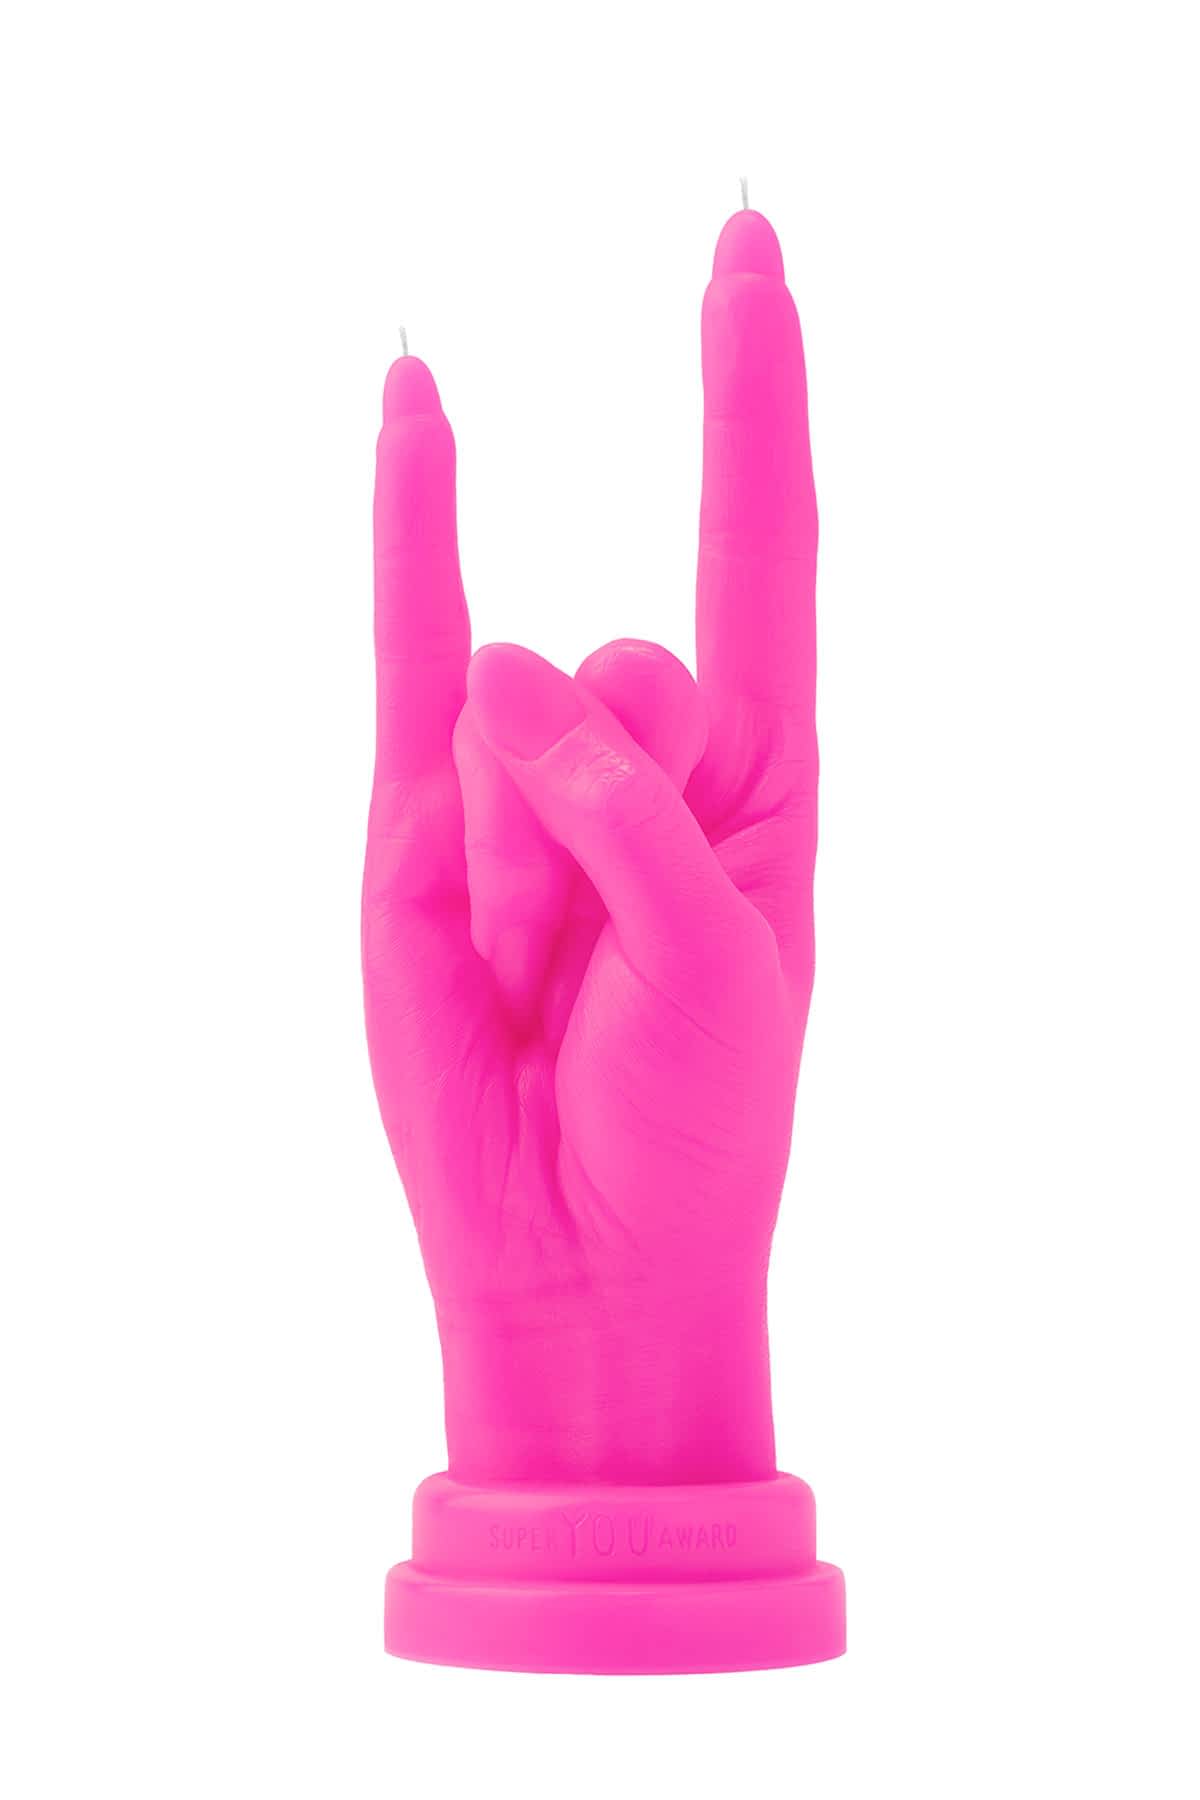 Meetthe-SUPER-YOU-AWARD-collectible-neon-pink-ROCK-ON-hand-candle